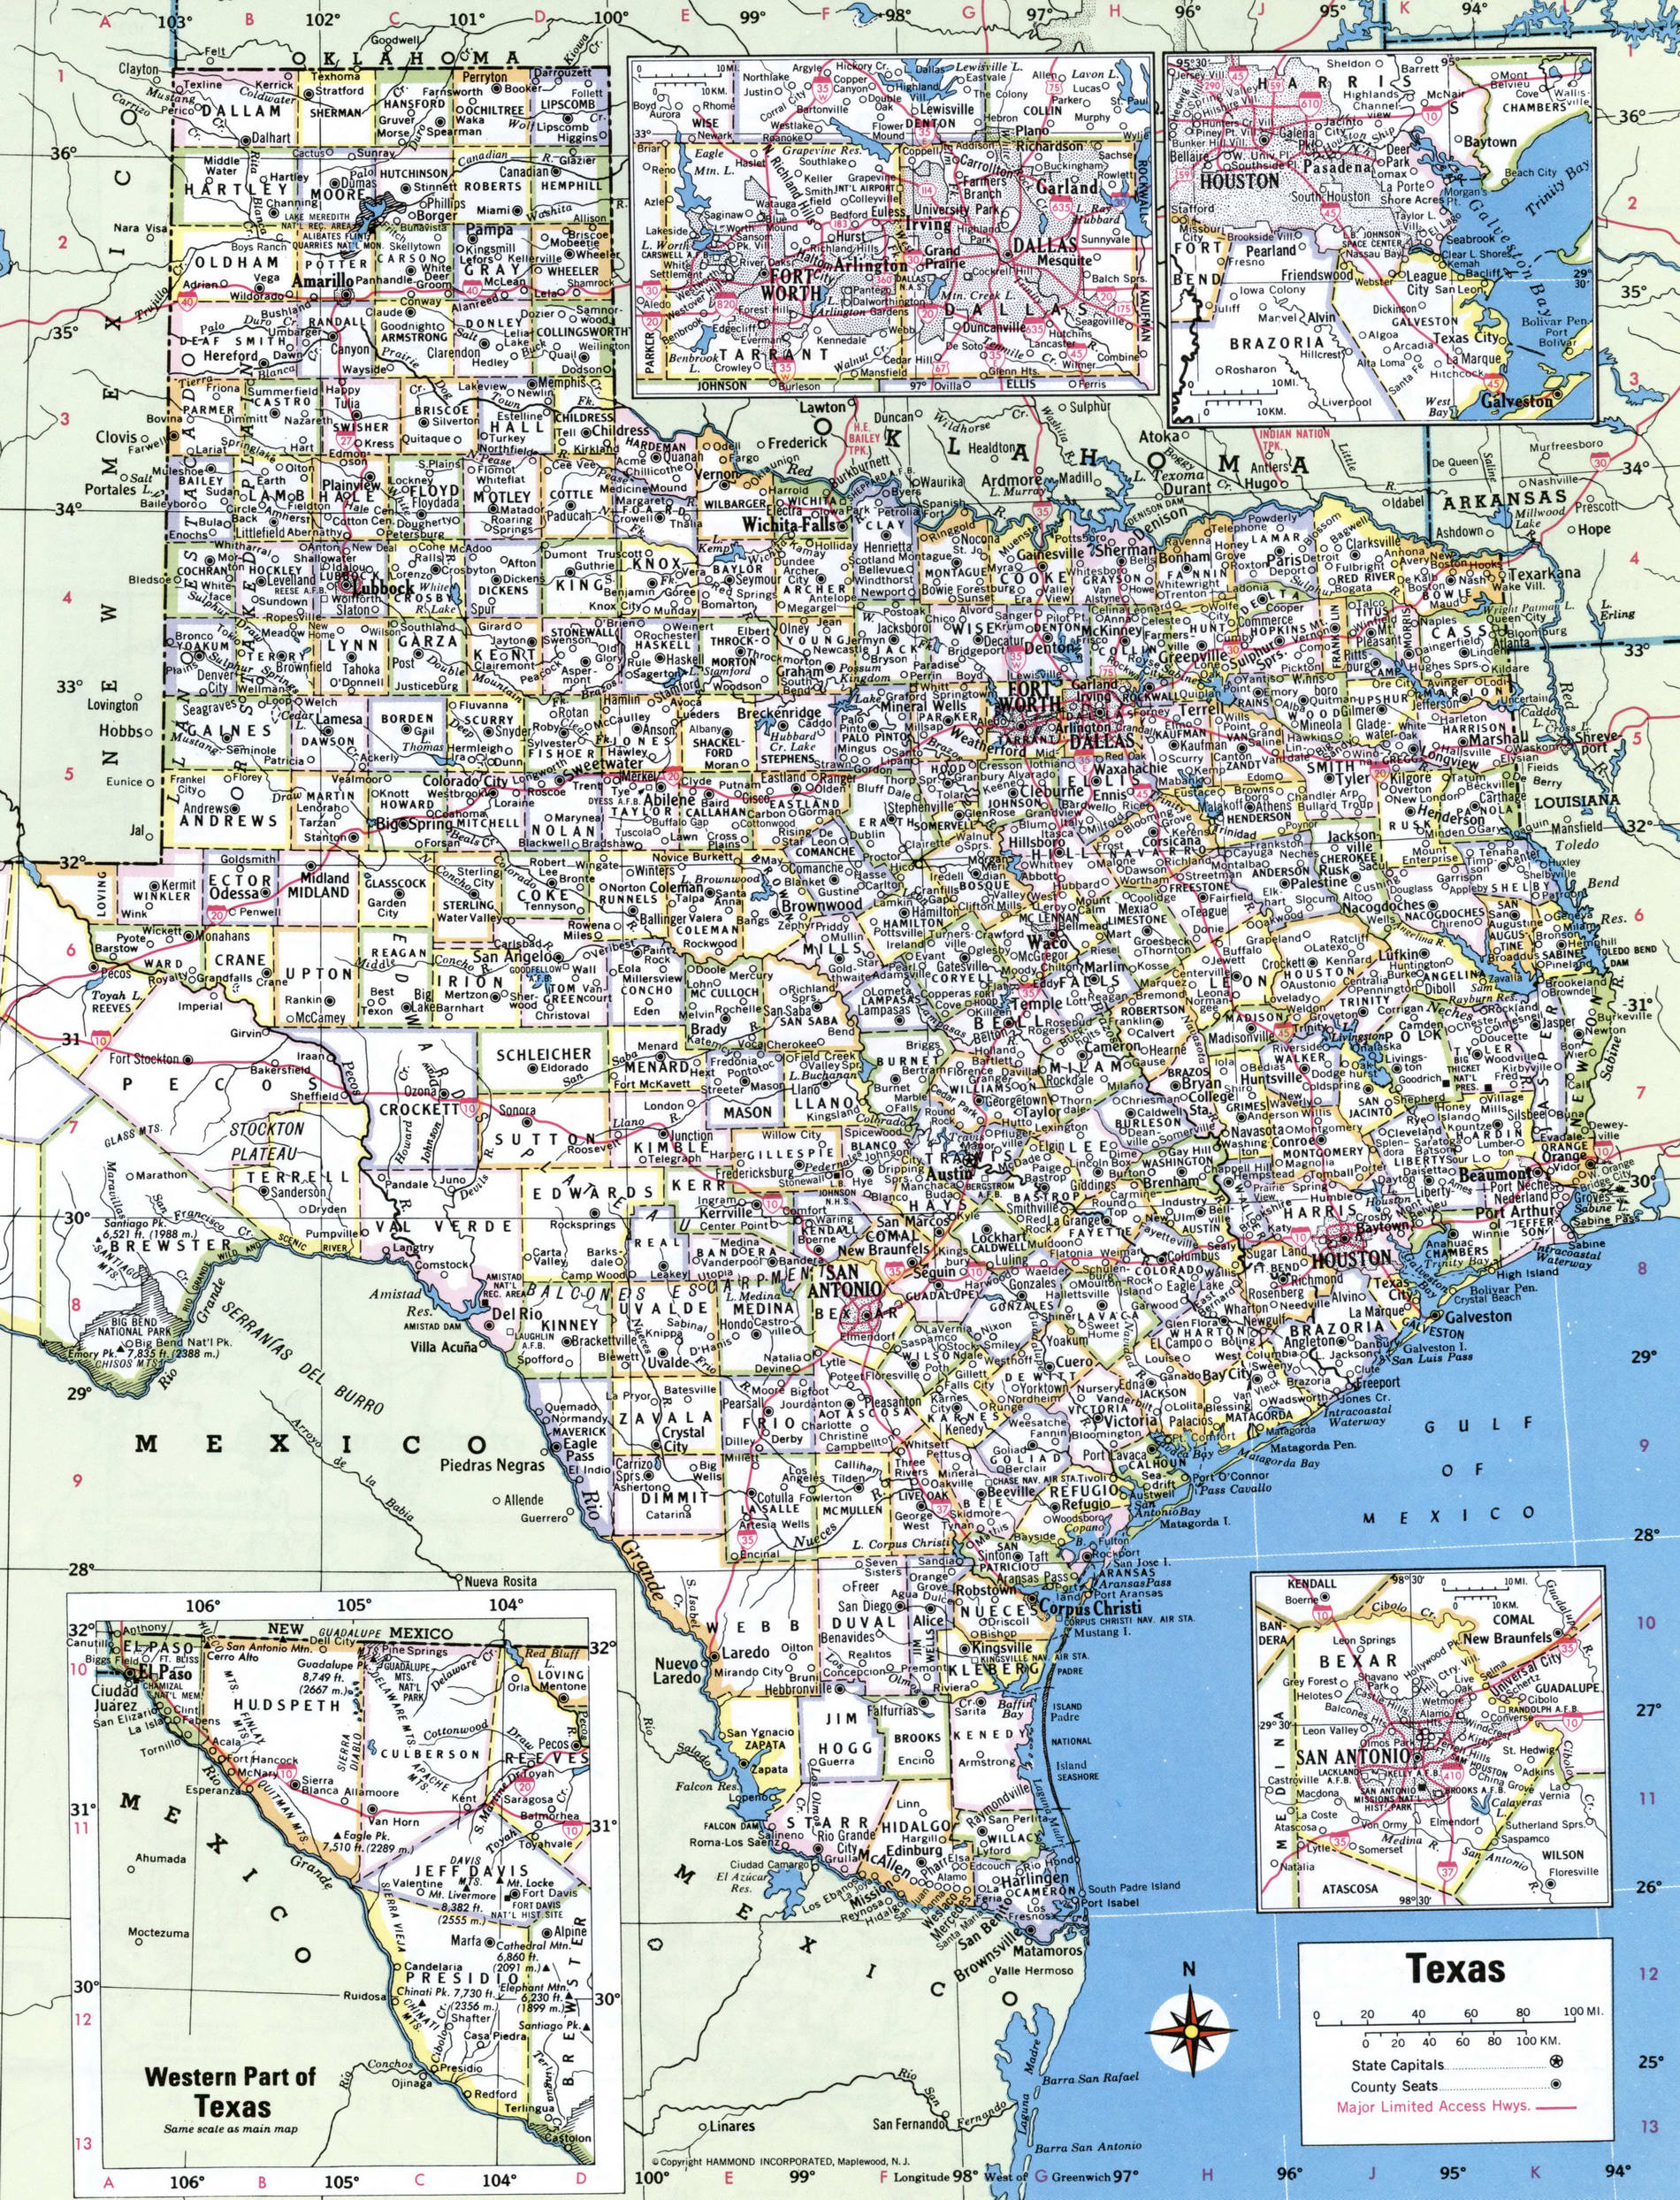 Map of Texas showing county with cities and road highways, counties Texas